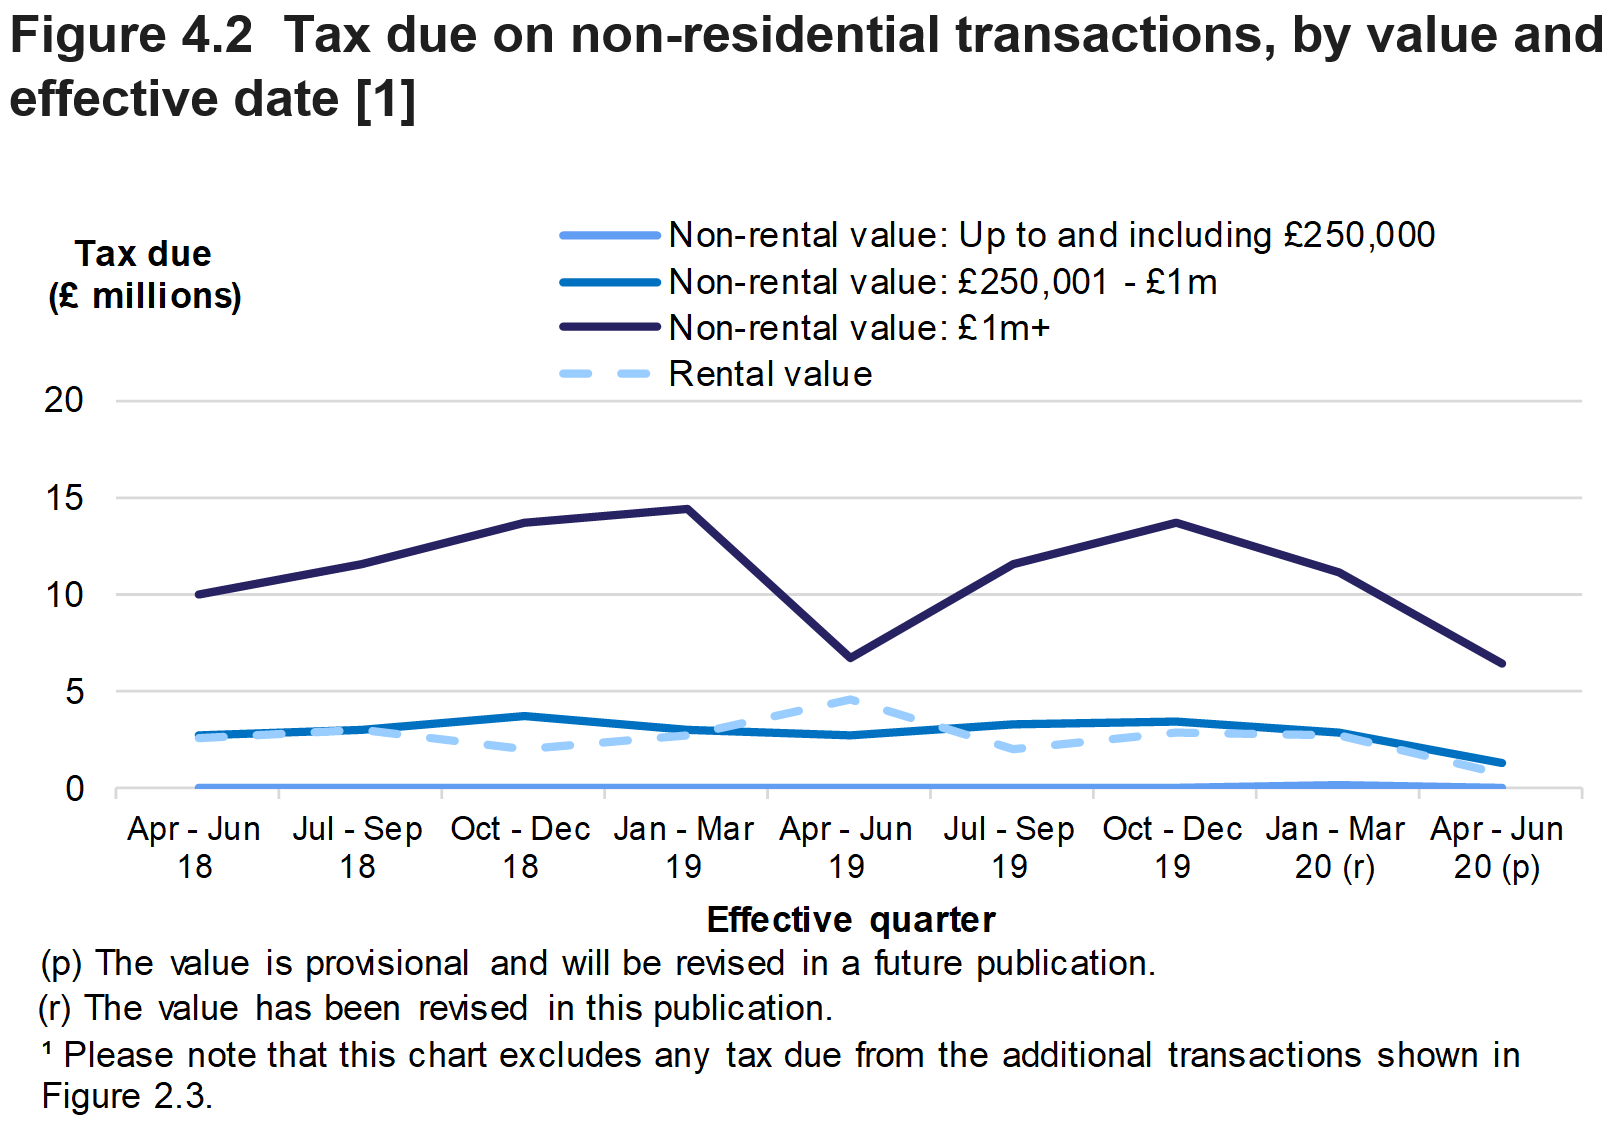 Figure 4.2 shows the amount of tax due on non-residential transactions by value of the property. Data is shown for the quarter in which the transaction was effective.